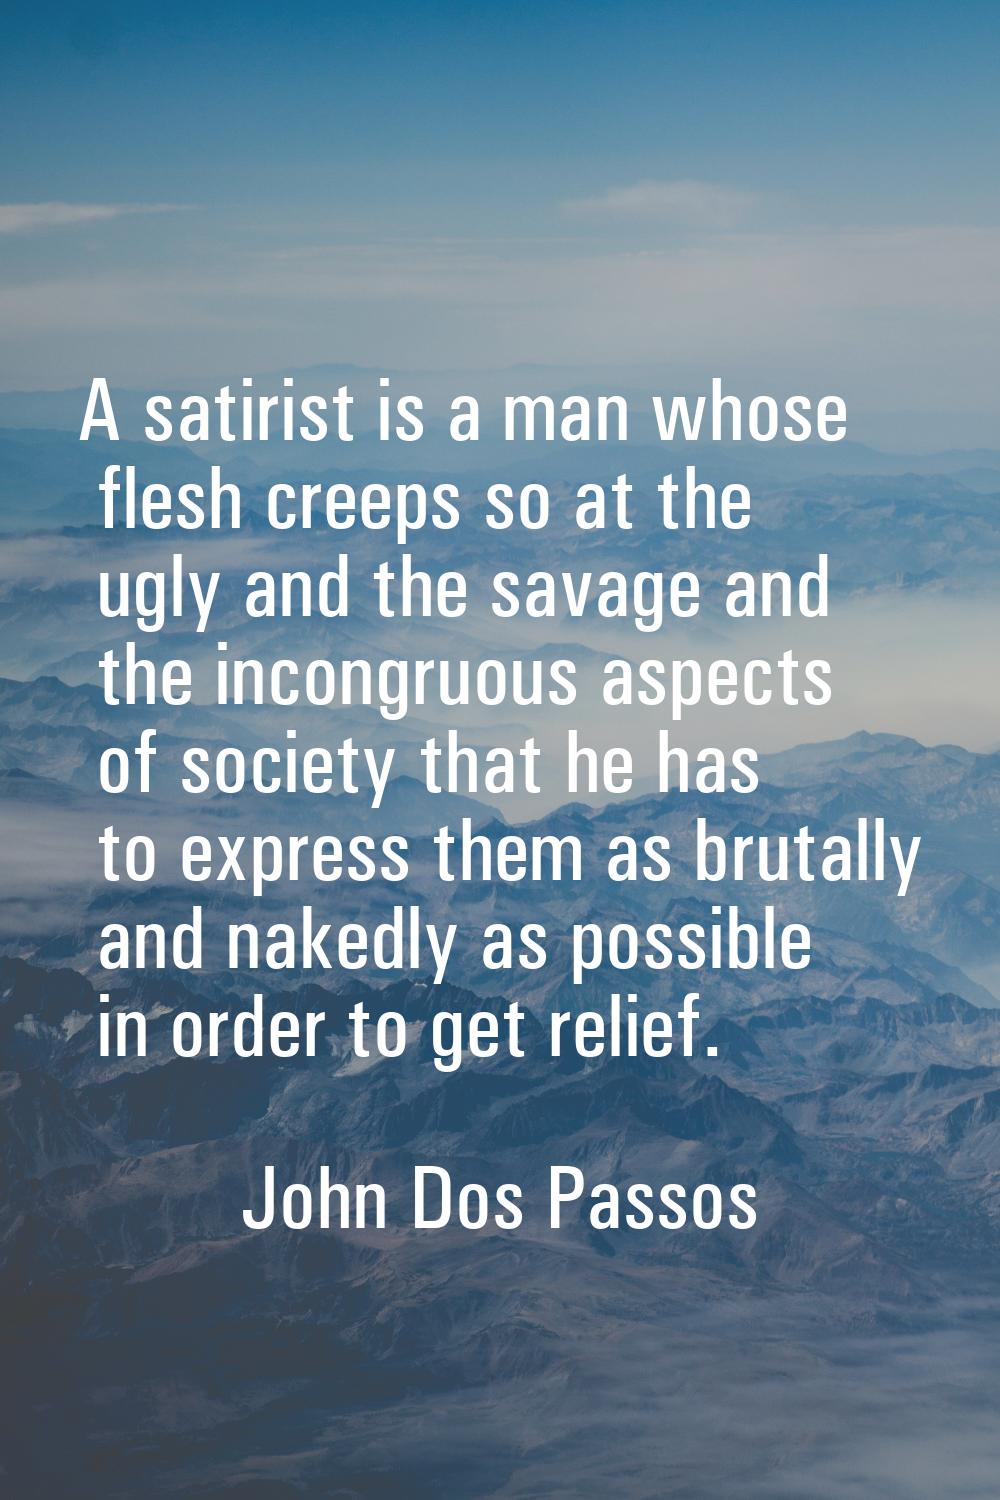 A satirist is a man whose flesh creeps so at the ugly and the savage and the incongruous aspects of